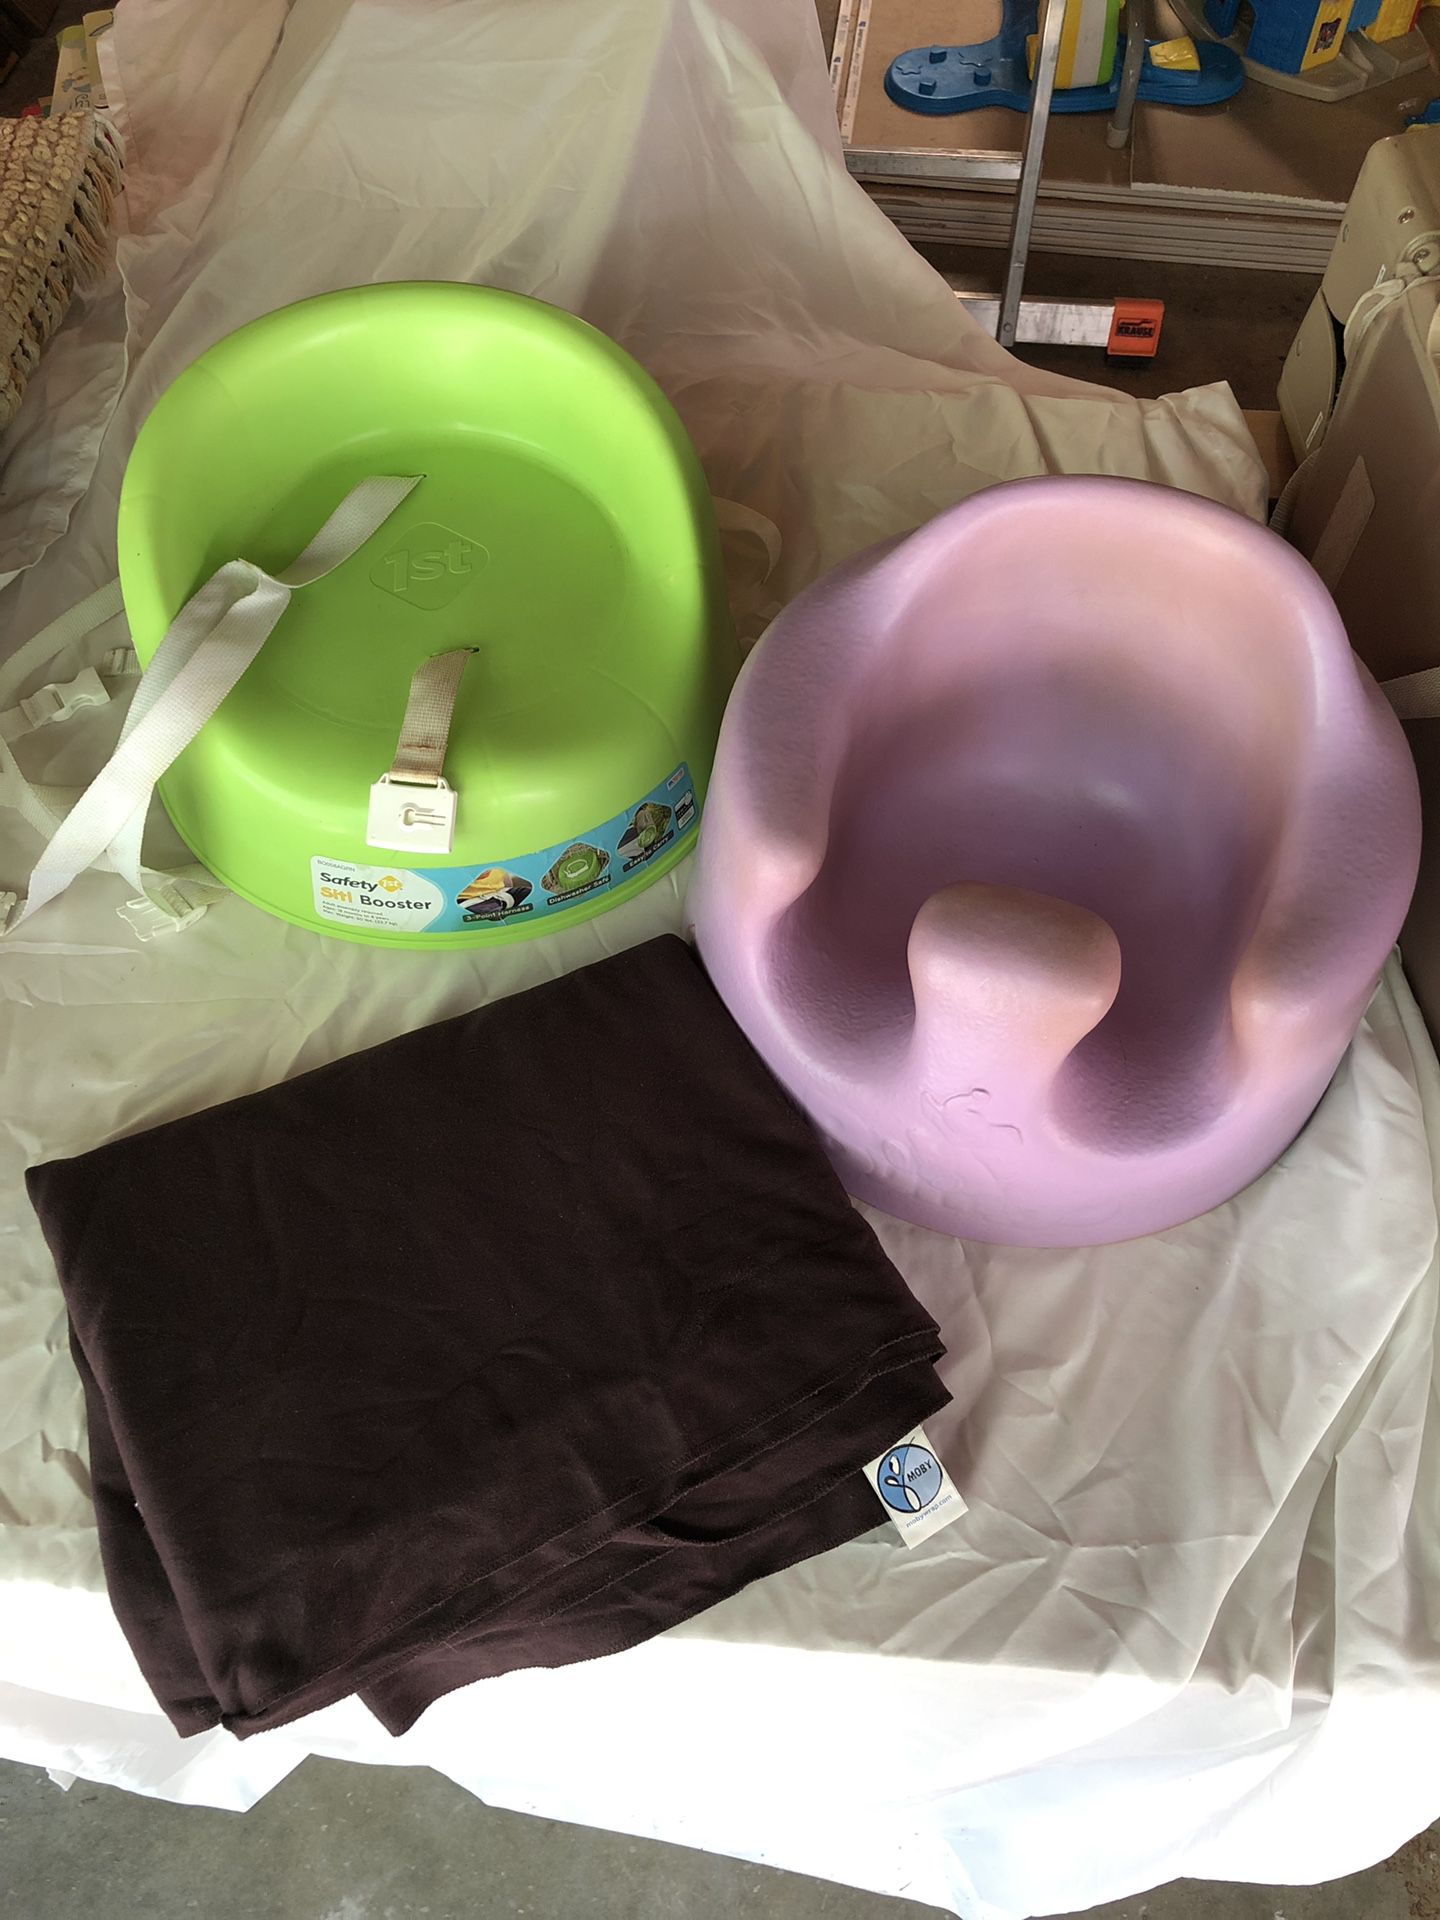 Baby bundle! Brown moby wrap, purple bumbo and green travel booster seat